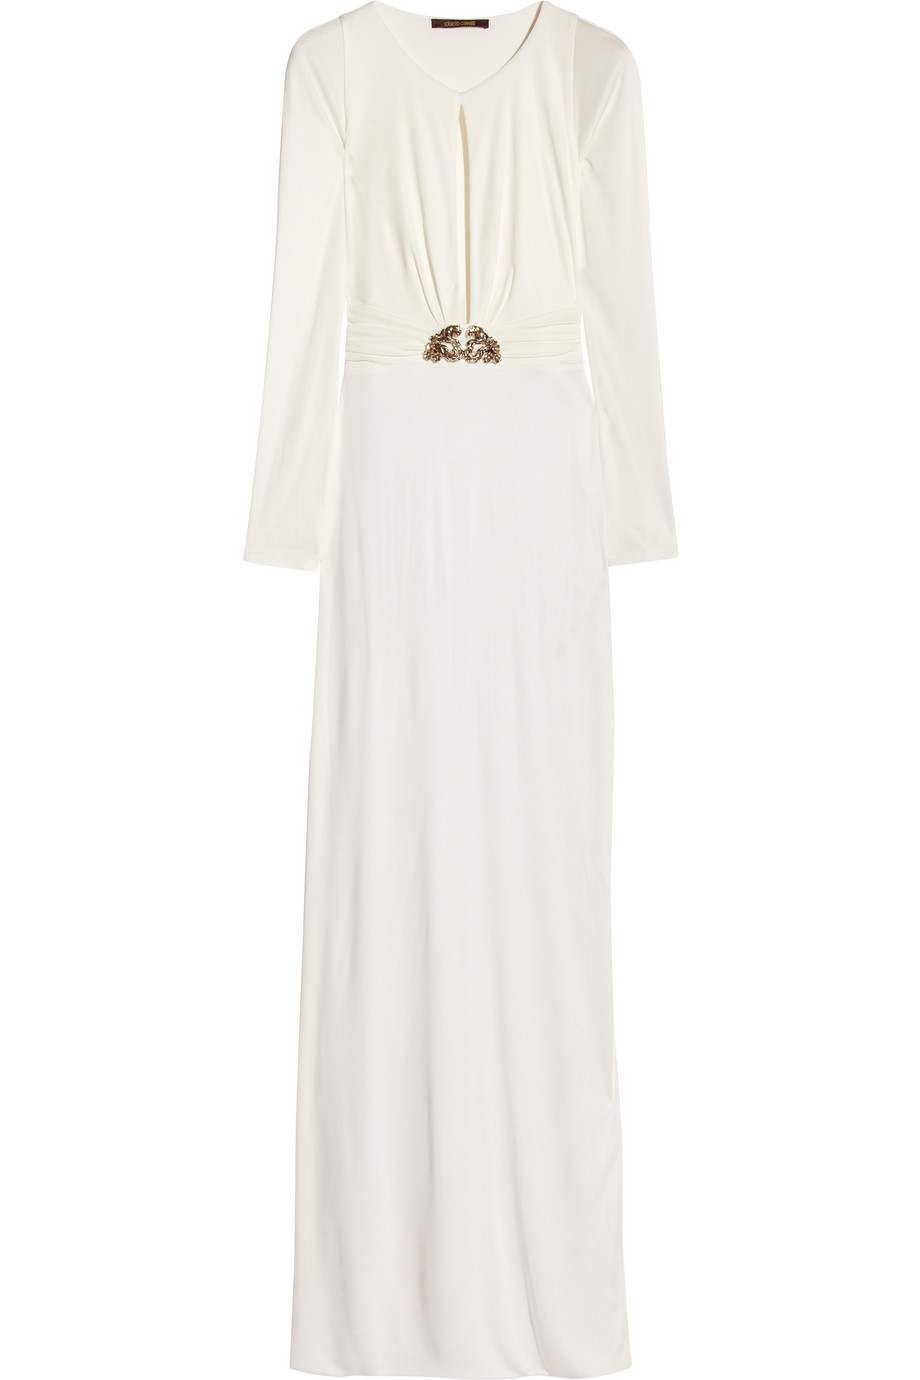 Lyst - Roberto Cavalli Cutout Embellished Jersey Gown in White